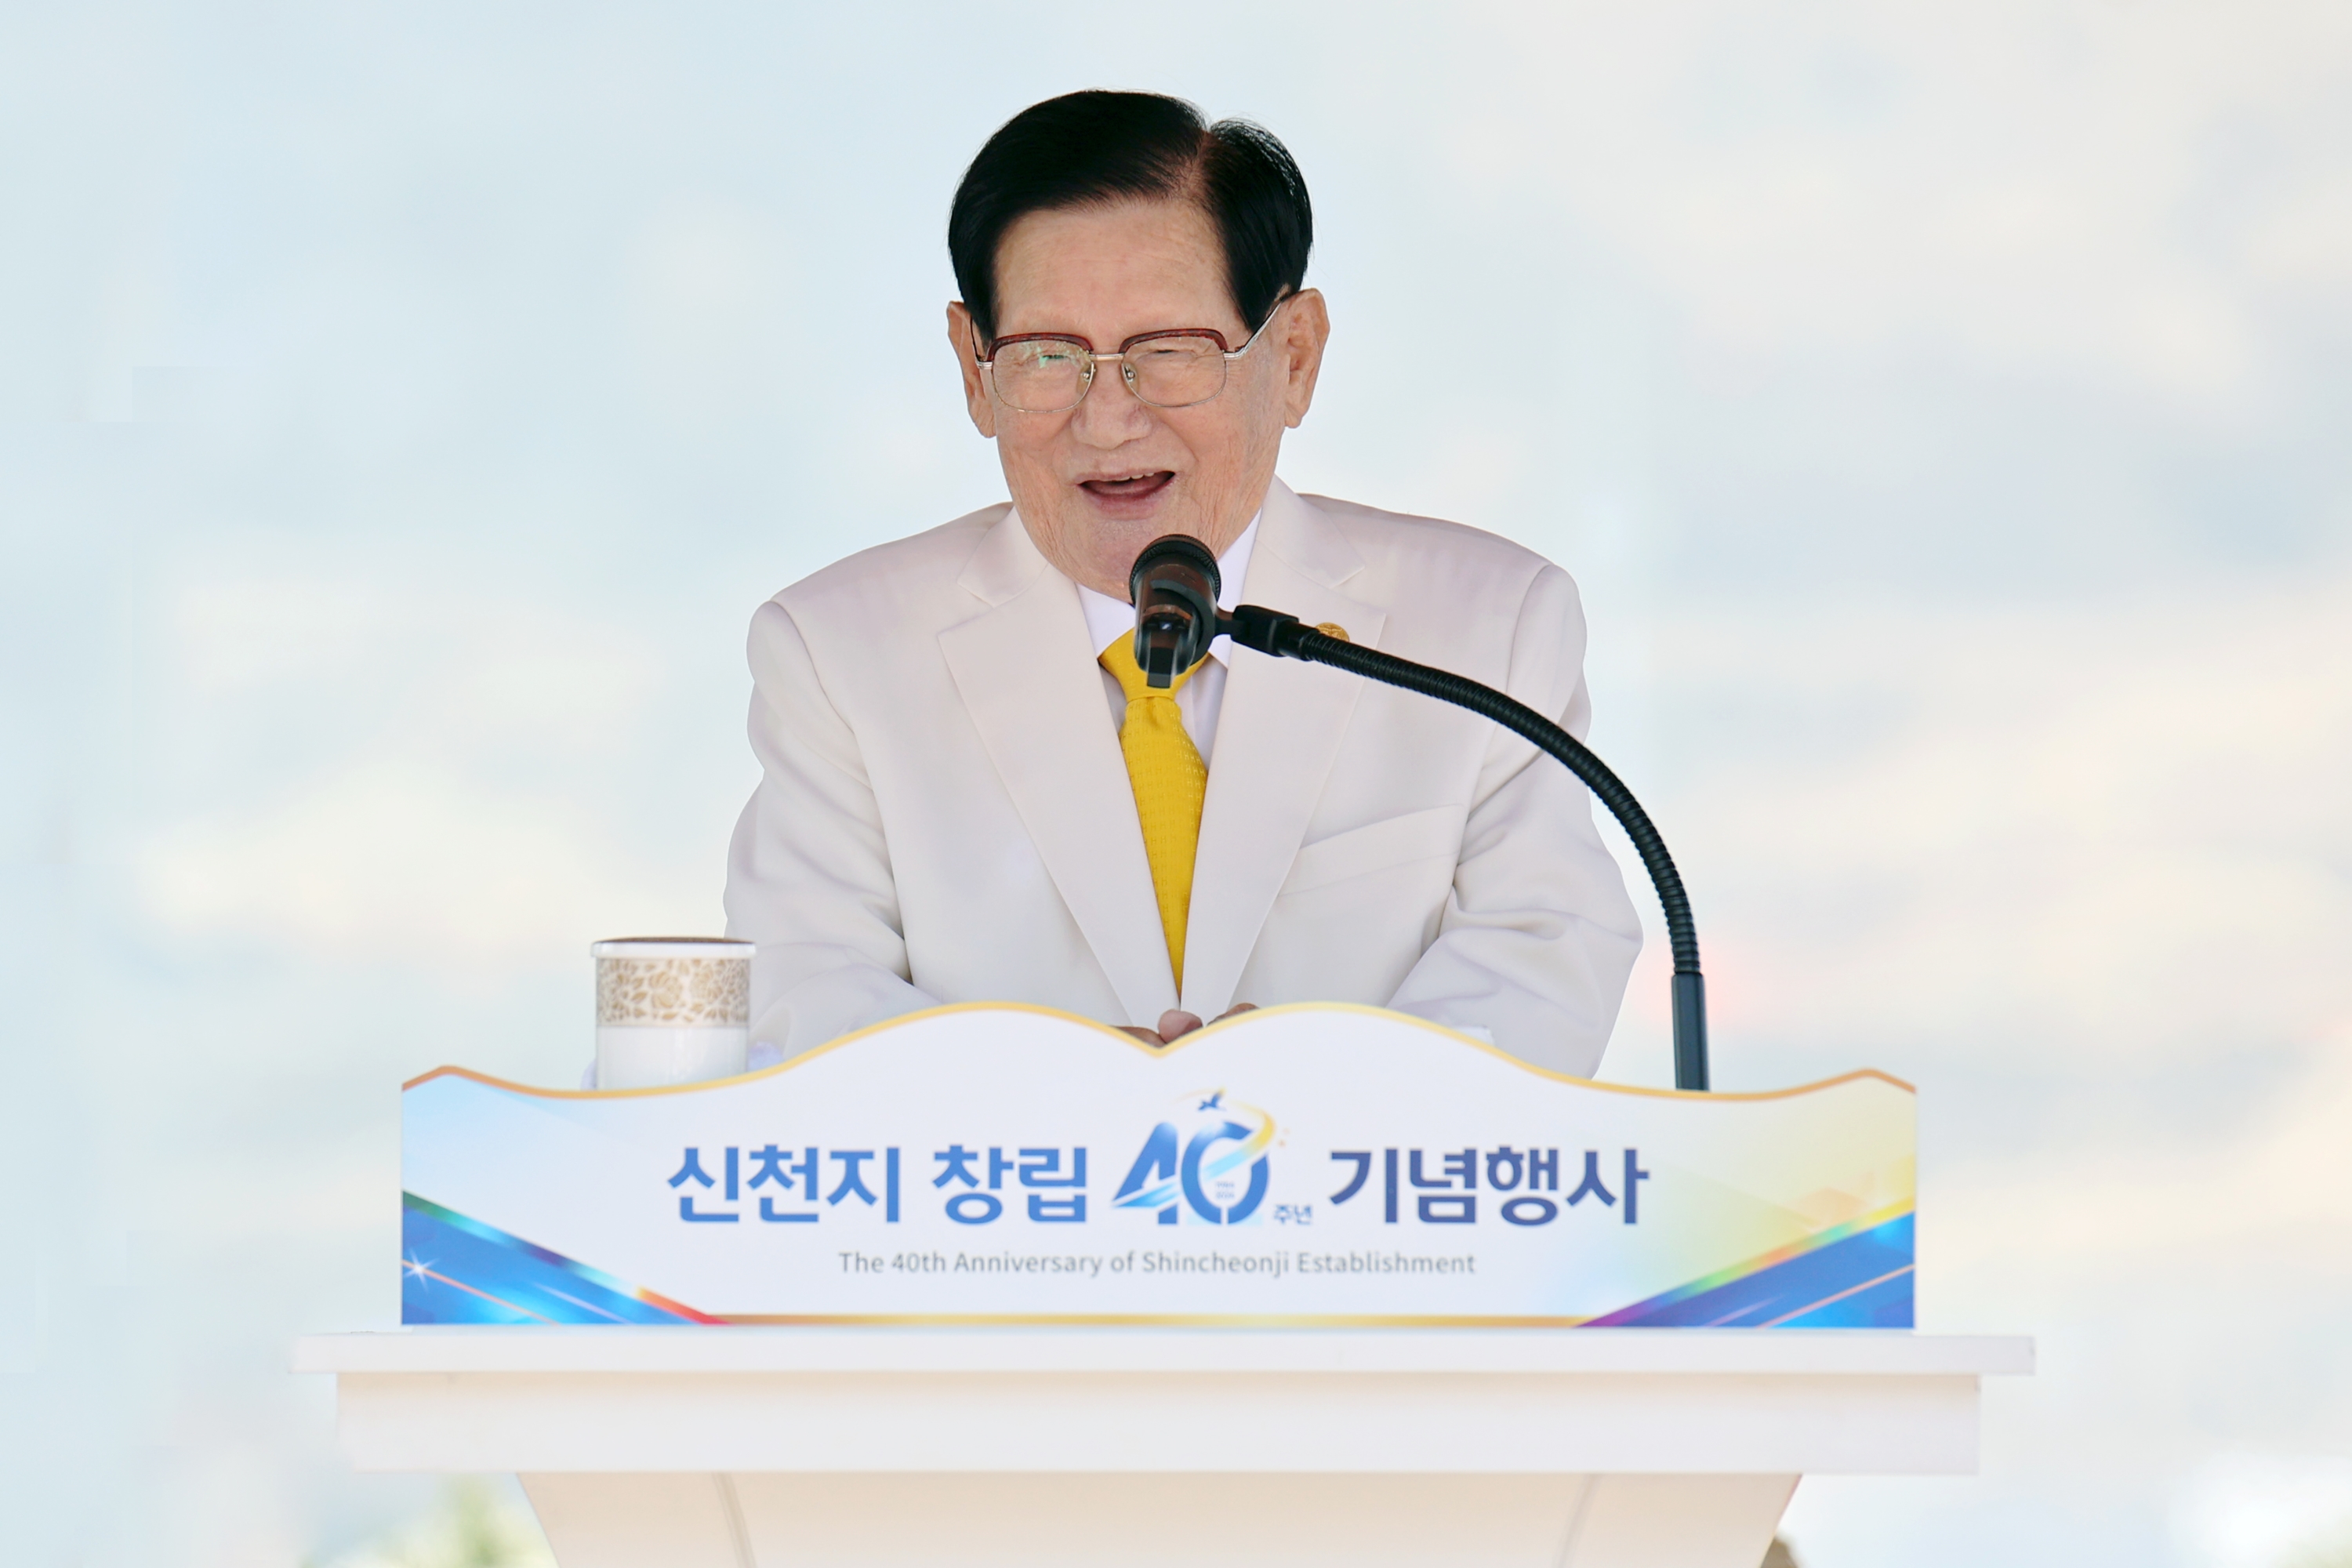 General Conference President ManHee Lee delivers a sermon during the 40th anniversary celebration